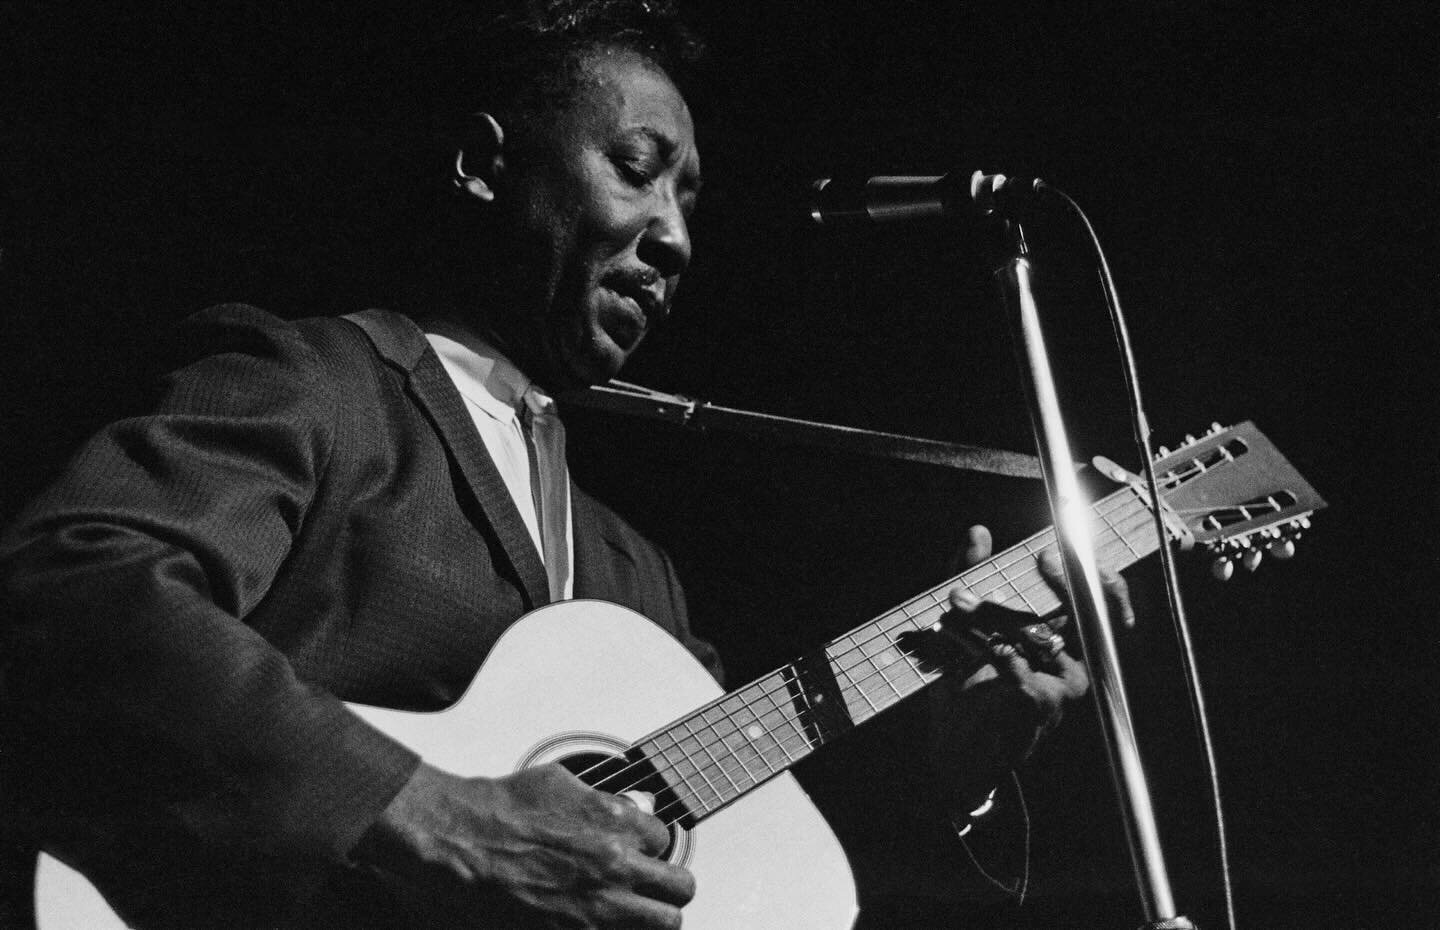 Remembering the iconic Muddy Waters on his birthday today.

Muddy was a major figure in the Chicago Blues Scene and helped shape electric blues. He has inspired many rock figures, including @thedoors and myself.

Photo courtesy of Getty Images.